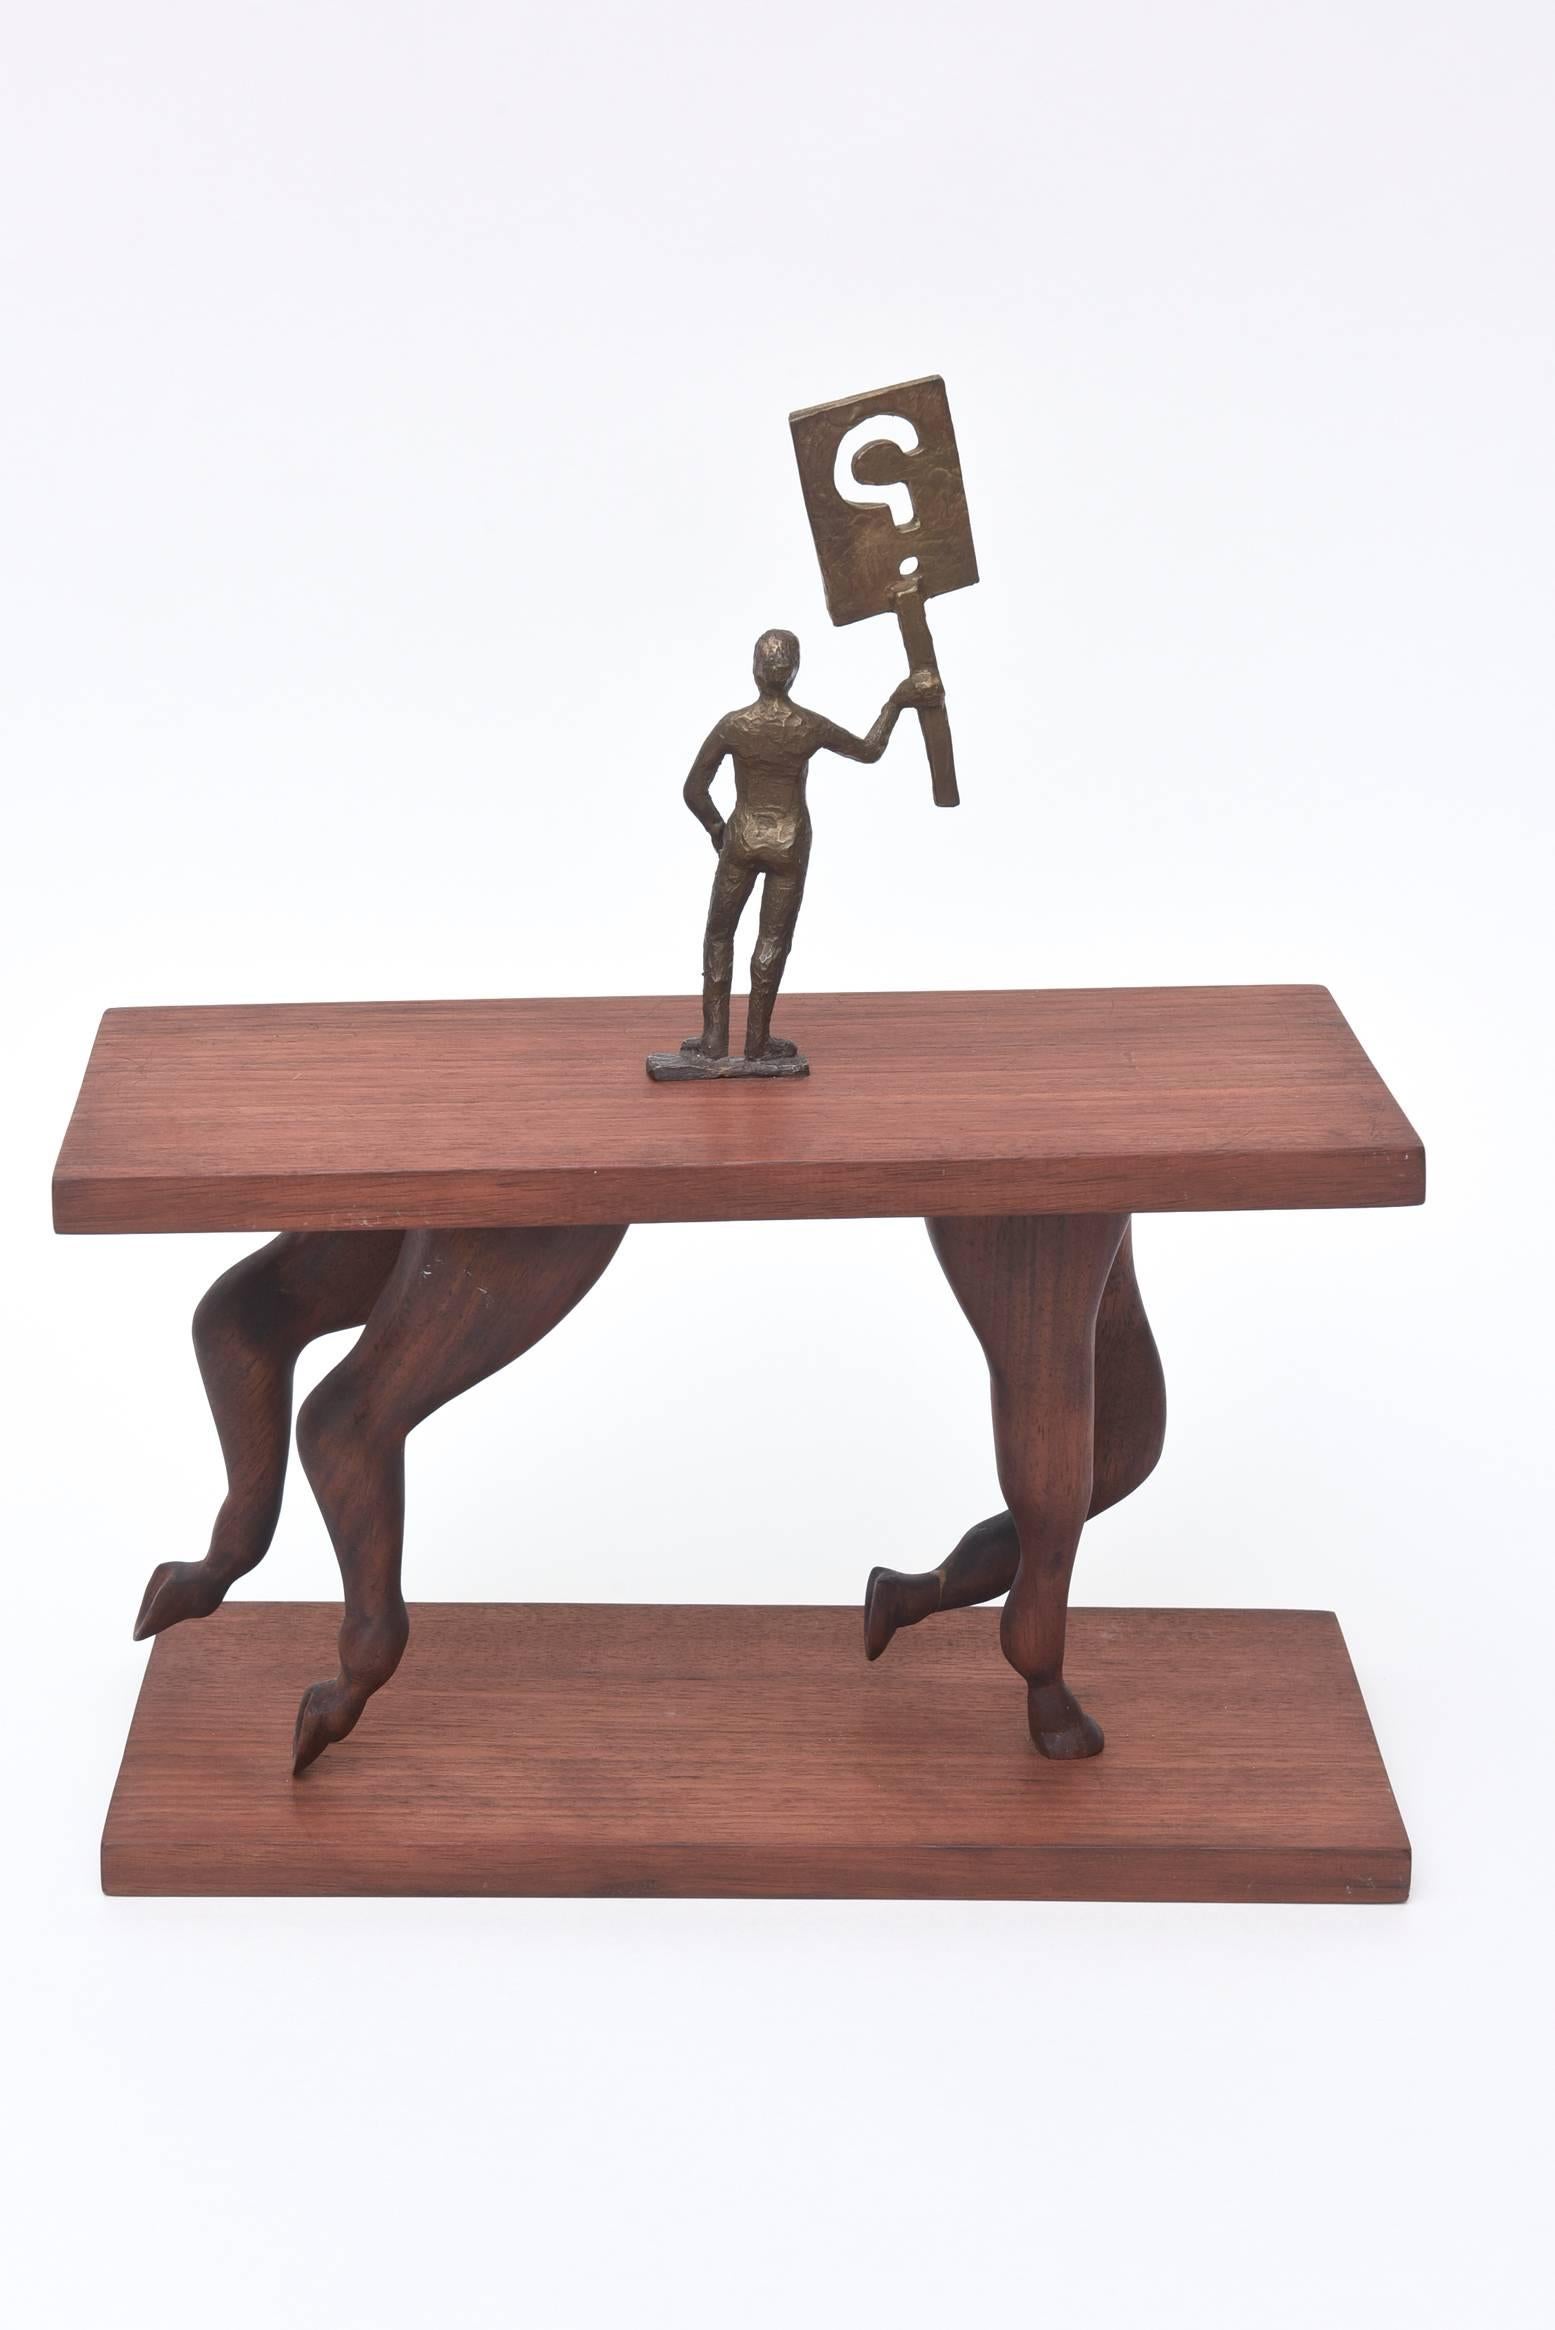 This more contemporary sculpture is dated 06 and the signature is hard to read but the initials are RW. It is one of a kind. The wood looks like walnut and the man holding the question sign is bronze. The horse legs in a gallop pose raise the